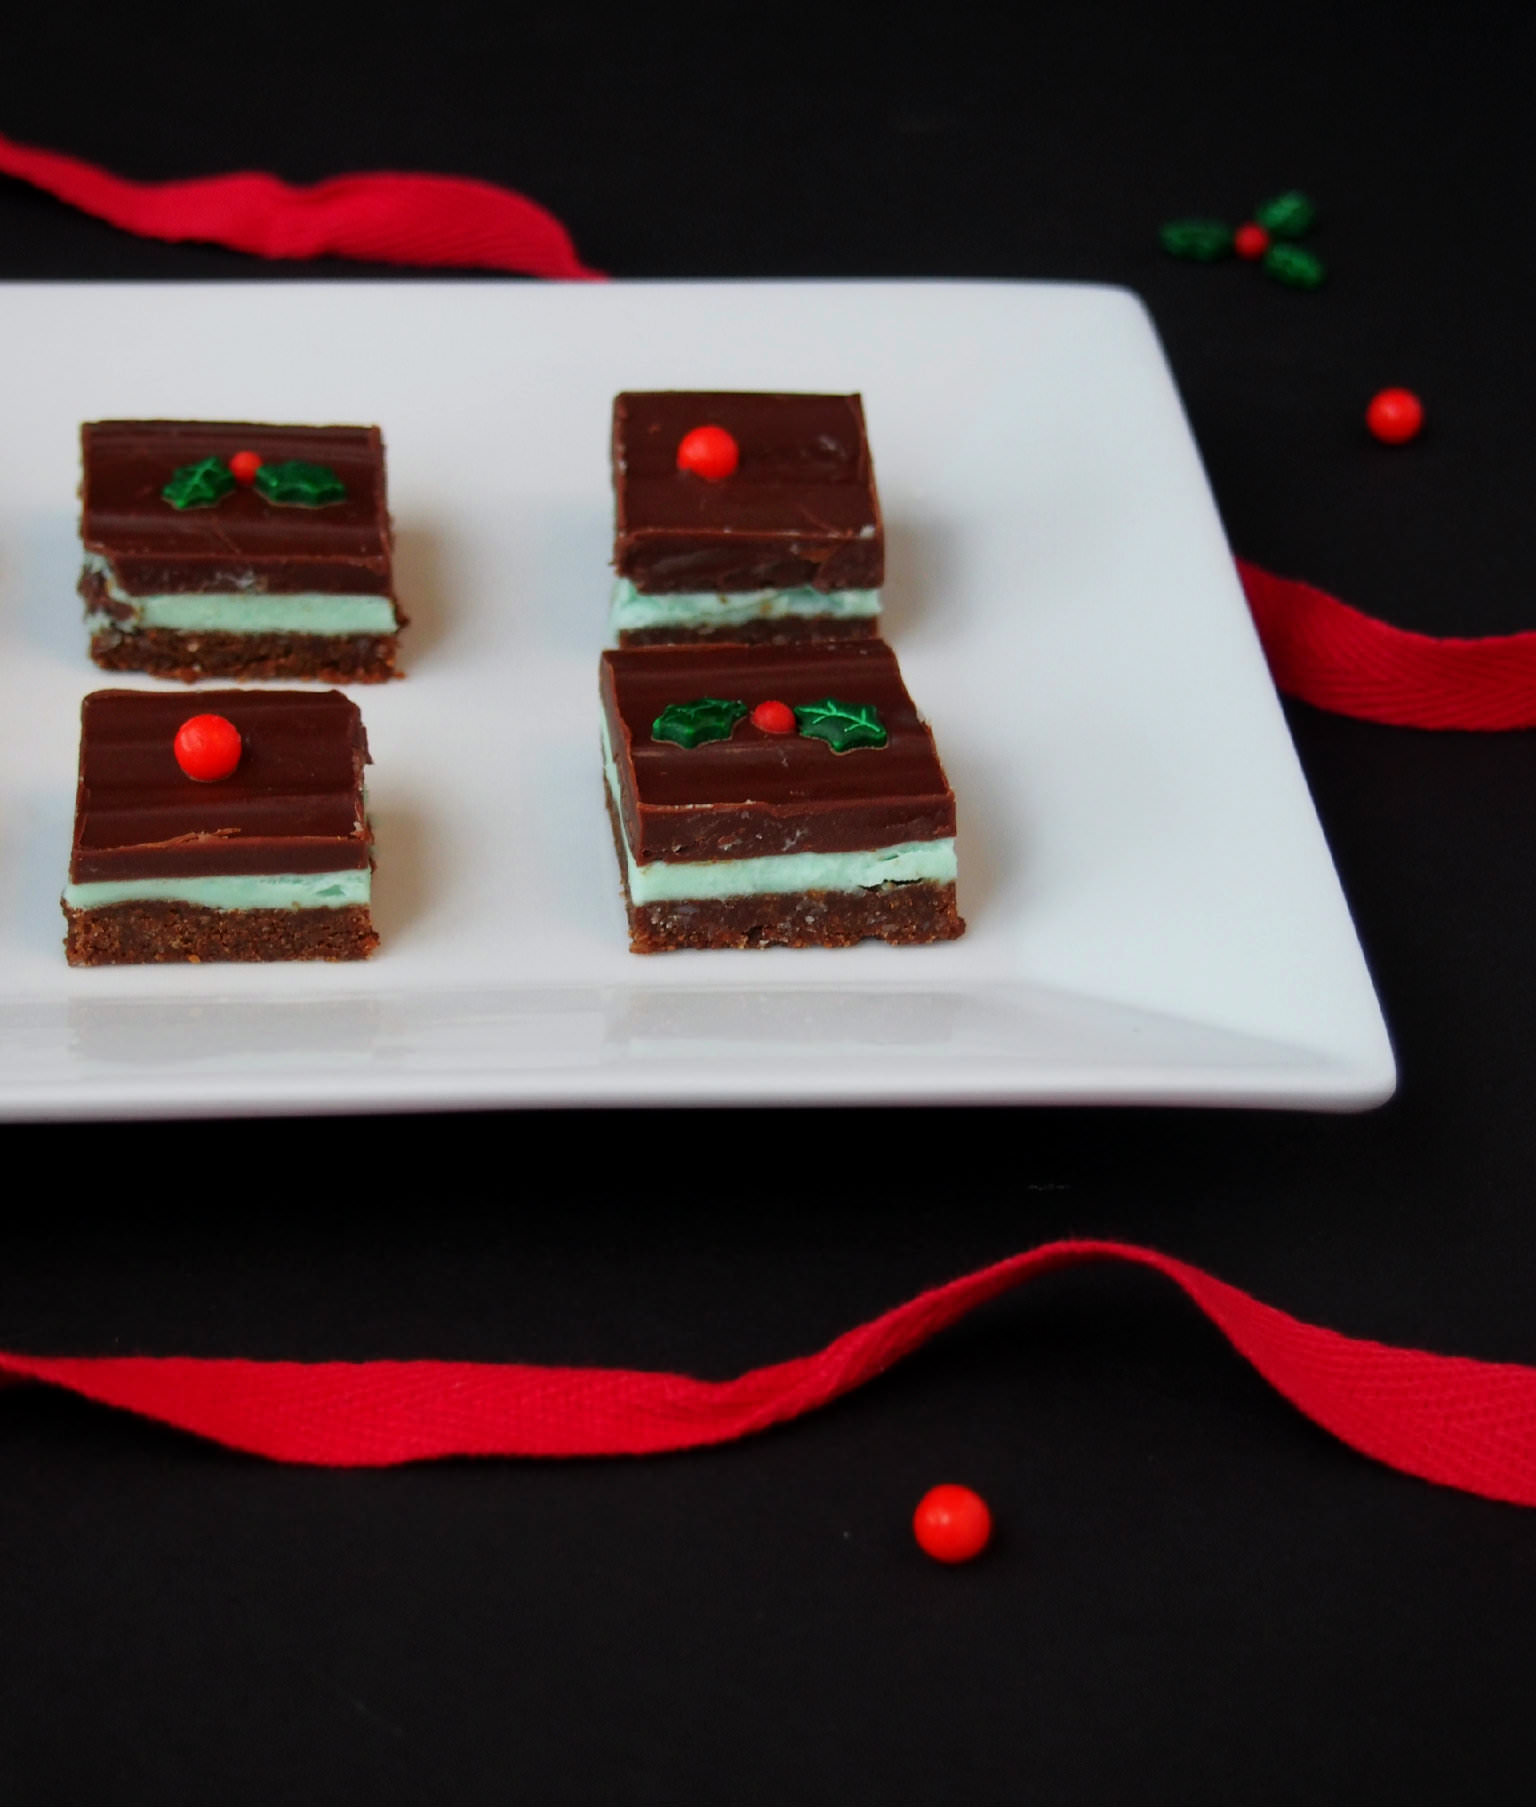 Crème de Menthe bars are a great holiday food gift! Refreshing mint, layered between rich chocolate ganache and a crunchy chocolate graham cracker crust. | ComfortablyDomestic.com